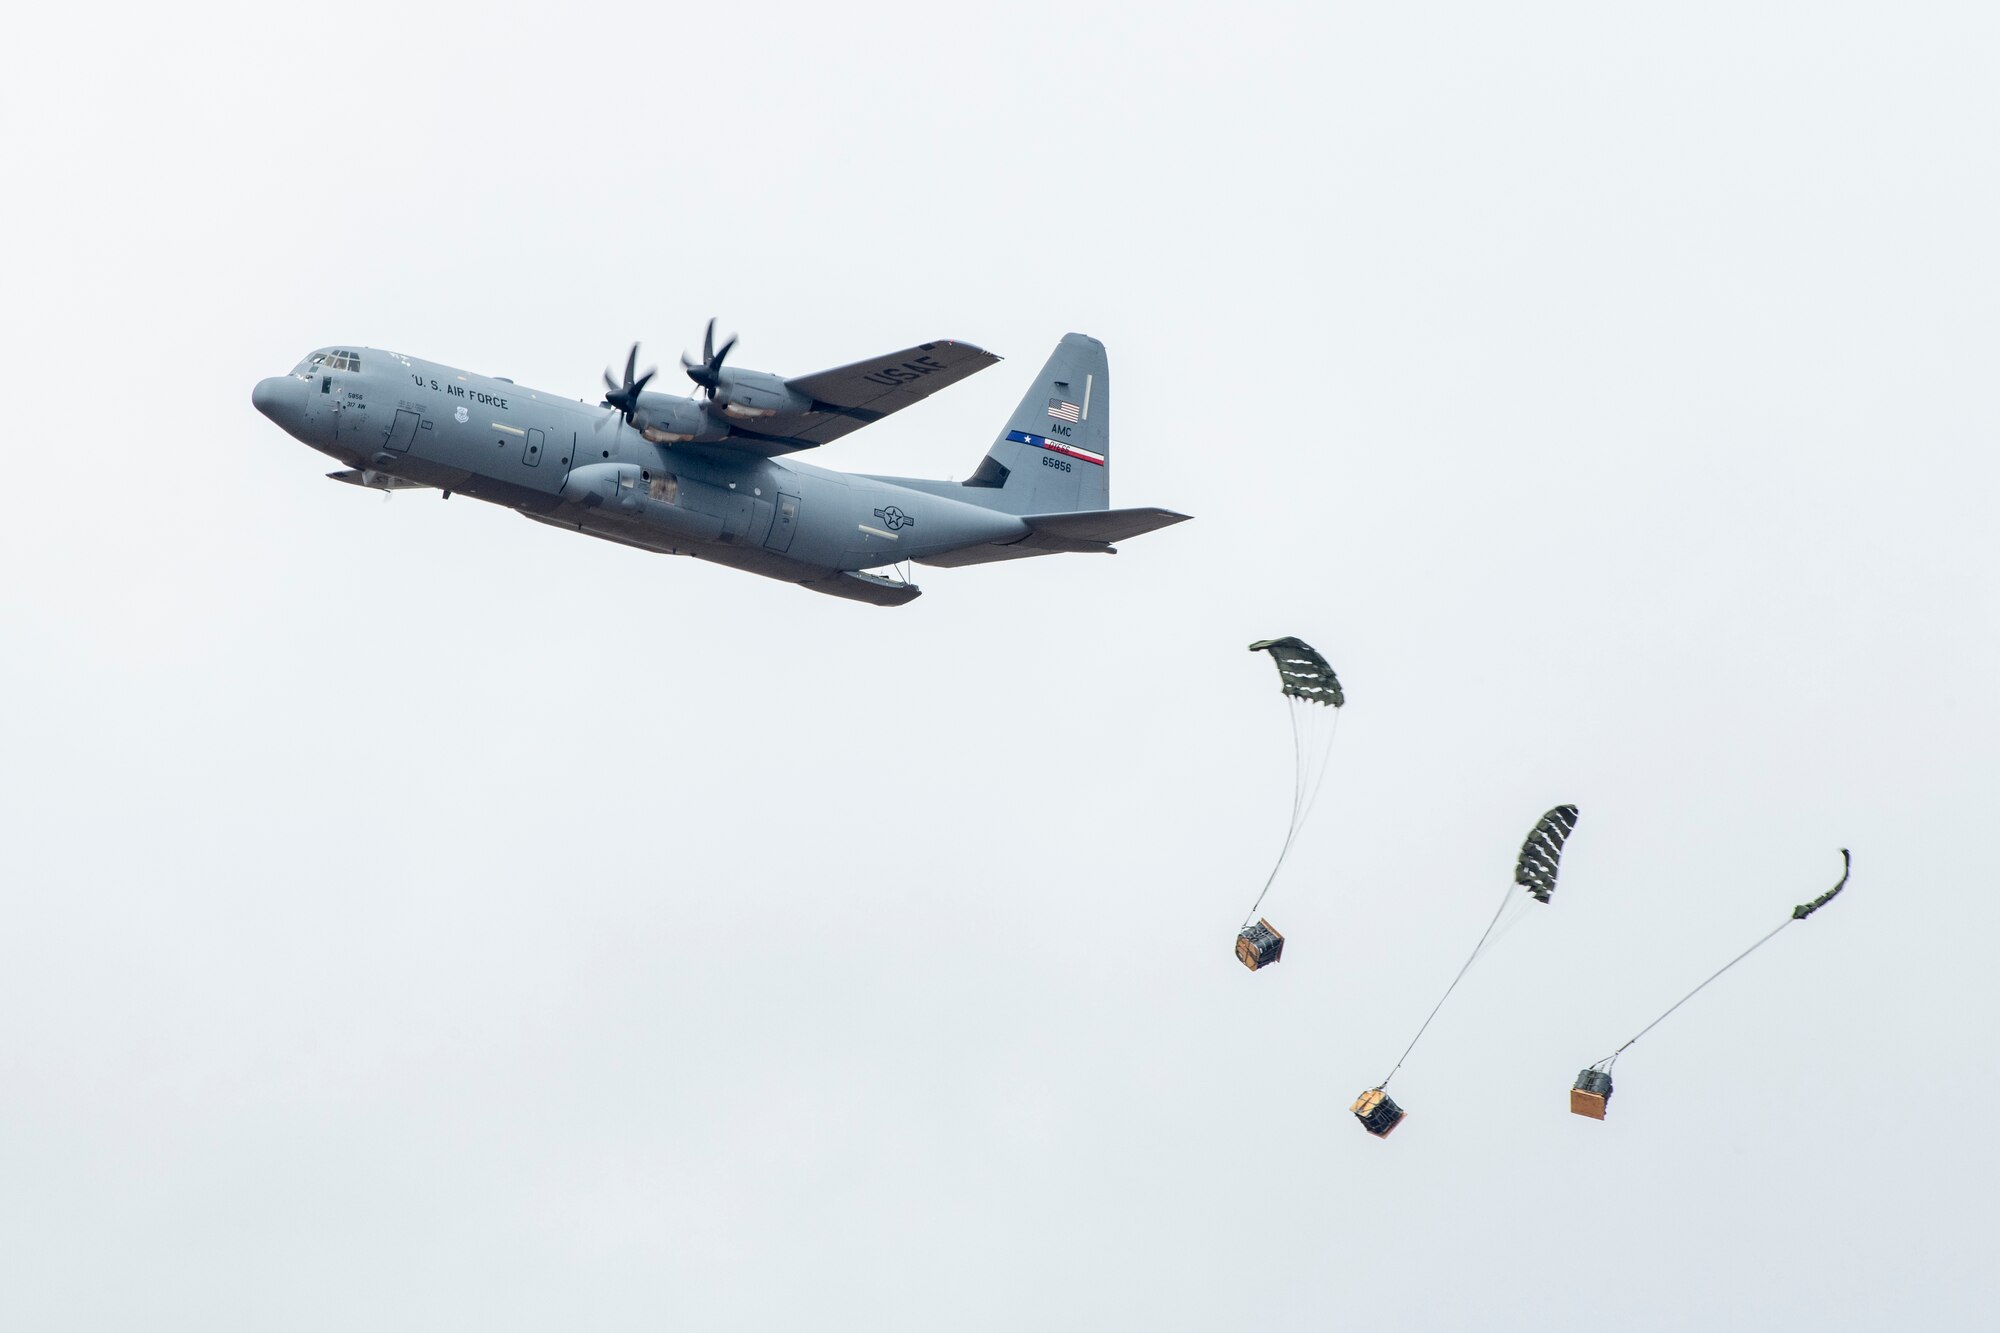 A C-130J Super Hercules team performs an airfield cargo drop demonstration during the 2023 Dyess Big Country Air Fest on Dyess Air Force Base, Texas, April 22, 2023. More than 30,000 event goers attended the one-day event highlighting the best of America’s only Lift and Strike base, Air Force heritage and Dyess community partners. The air show featured the F-22 Raptor demo team, U.S. Air Force Academy Wings of Blue, U.S. Army Golden Knights, WW II heritage flight and B-1B Lancer and C-130J Super Hercules fly overs. (U.S. Air Force photo by Senior Airman Mercedes Porter)